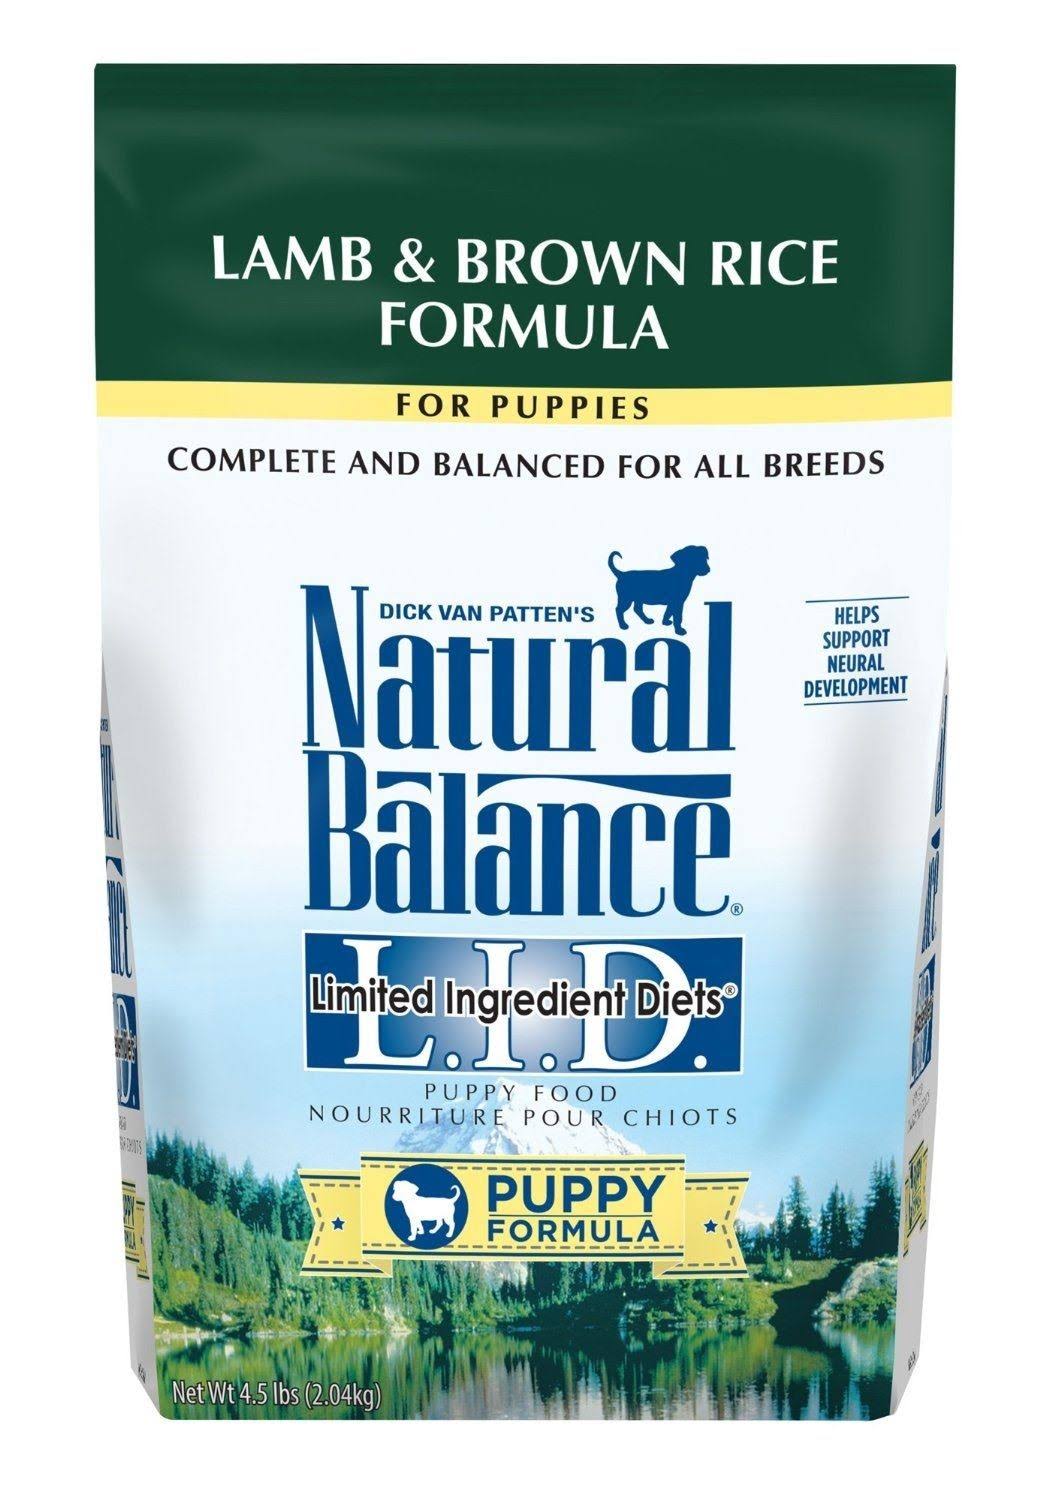 Natural Balance Limited Ingredient Diets Dogs Food, Lamb & Brown Rice Formula, Food for All Breeds - 4 lb